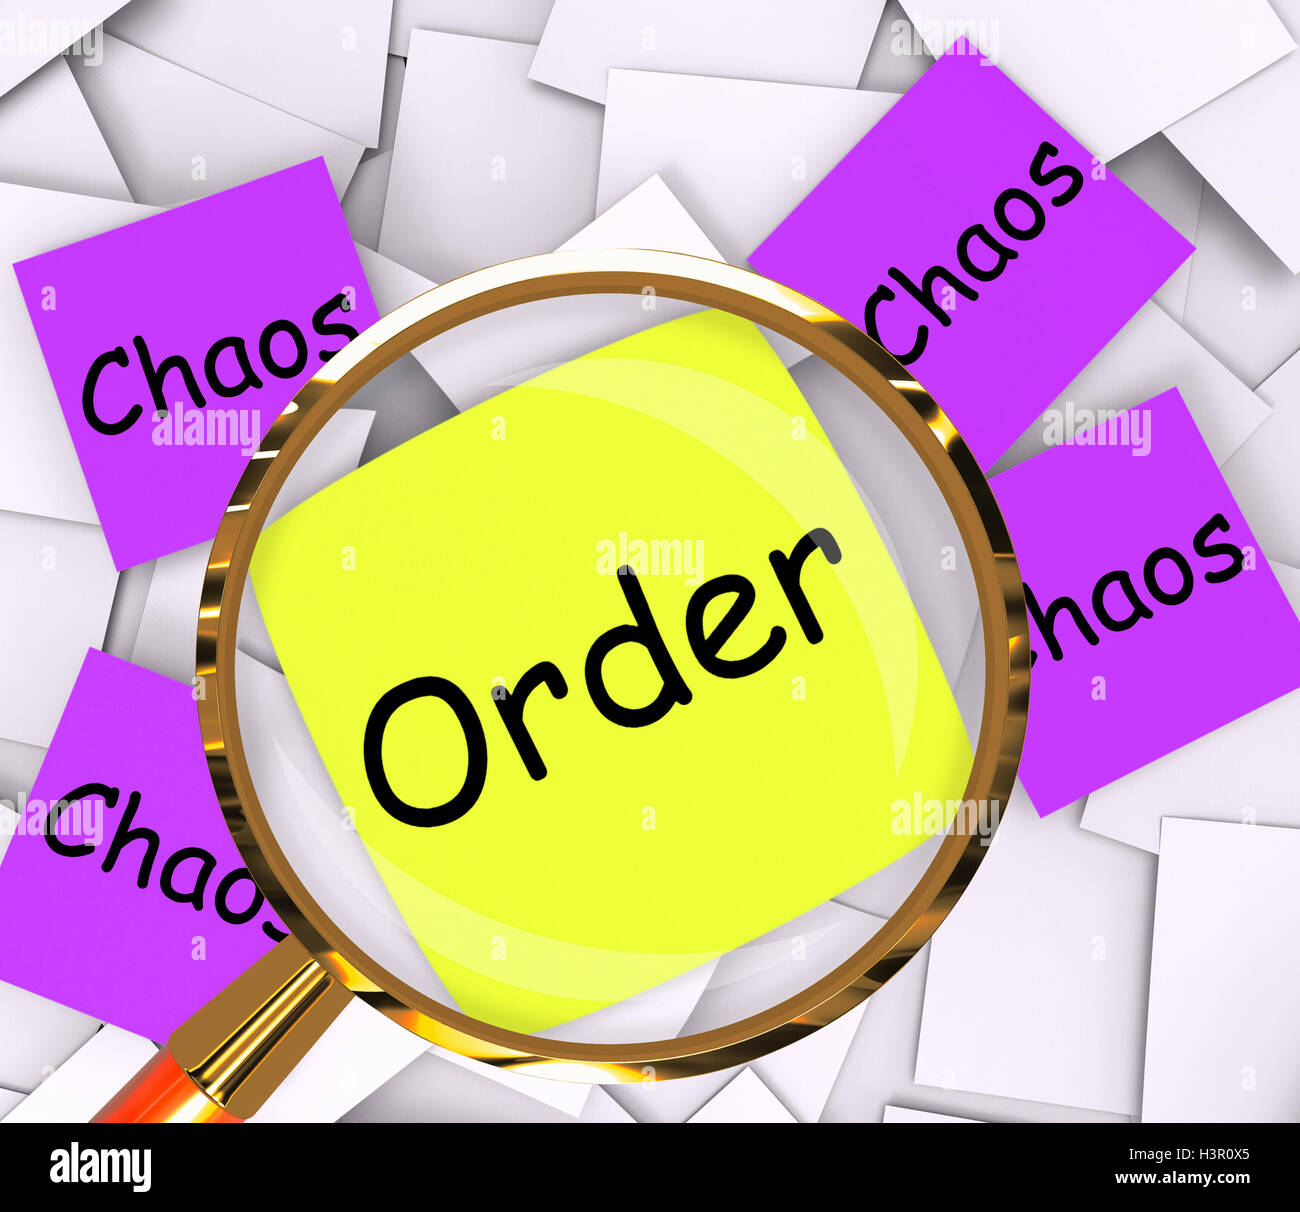 Order Chaos Post-It Papers Show Organized Or Confused Stock Photo